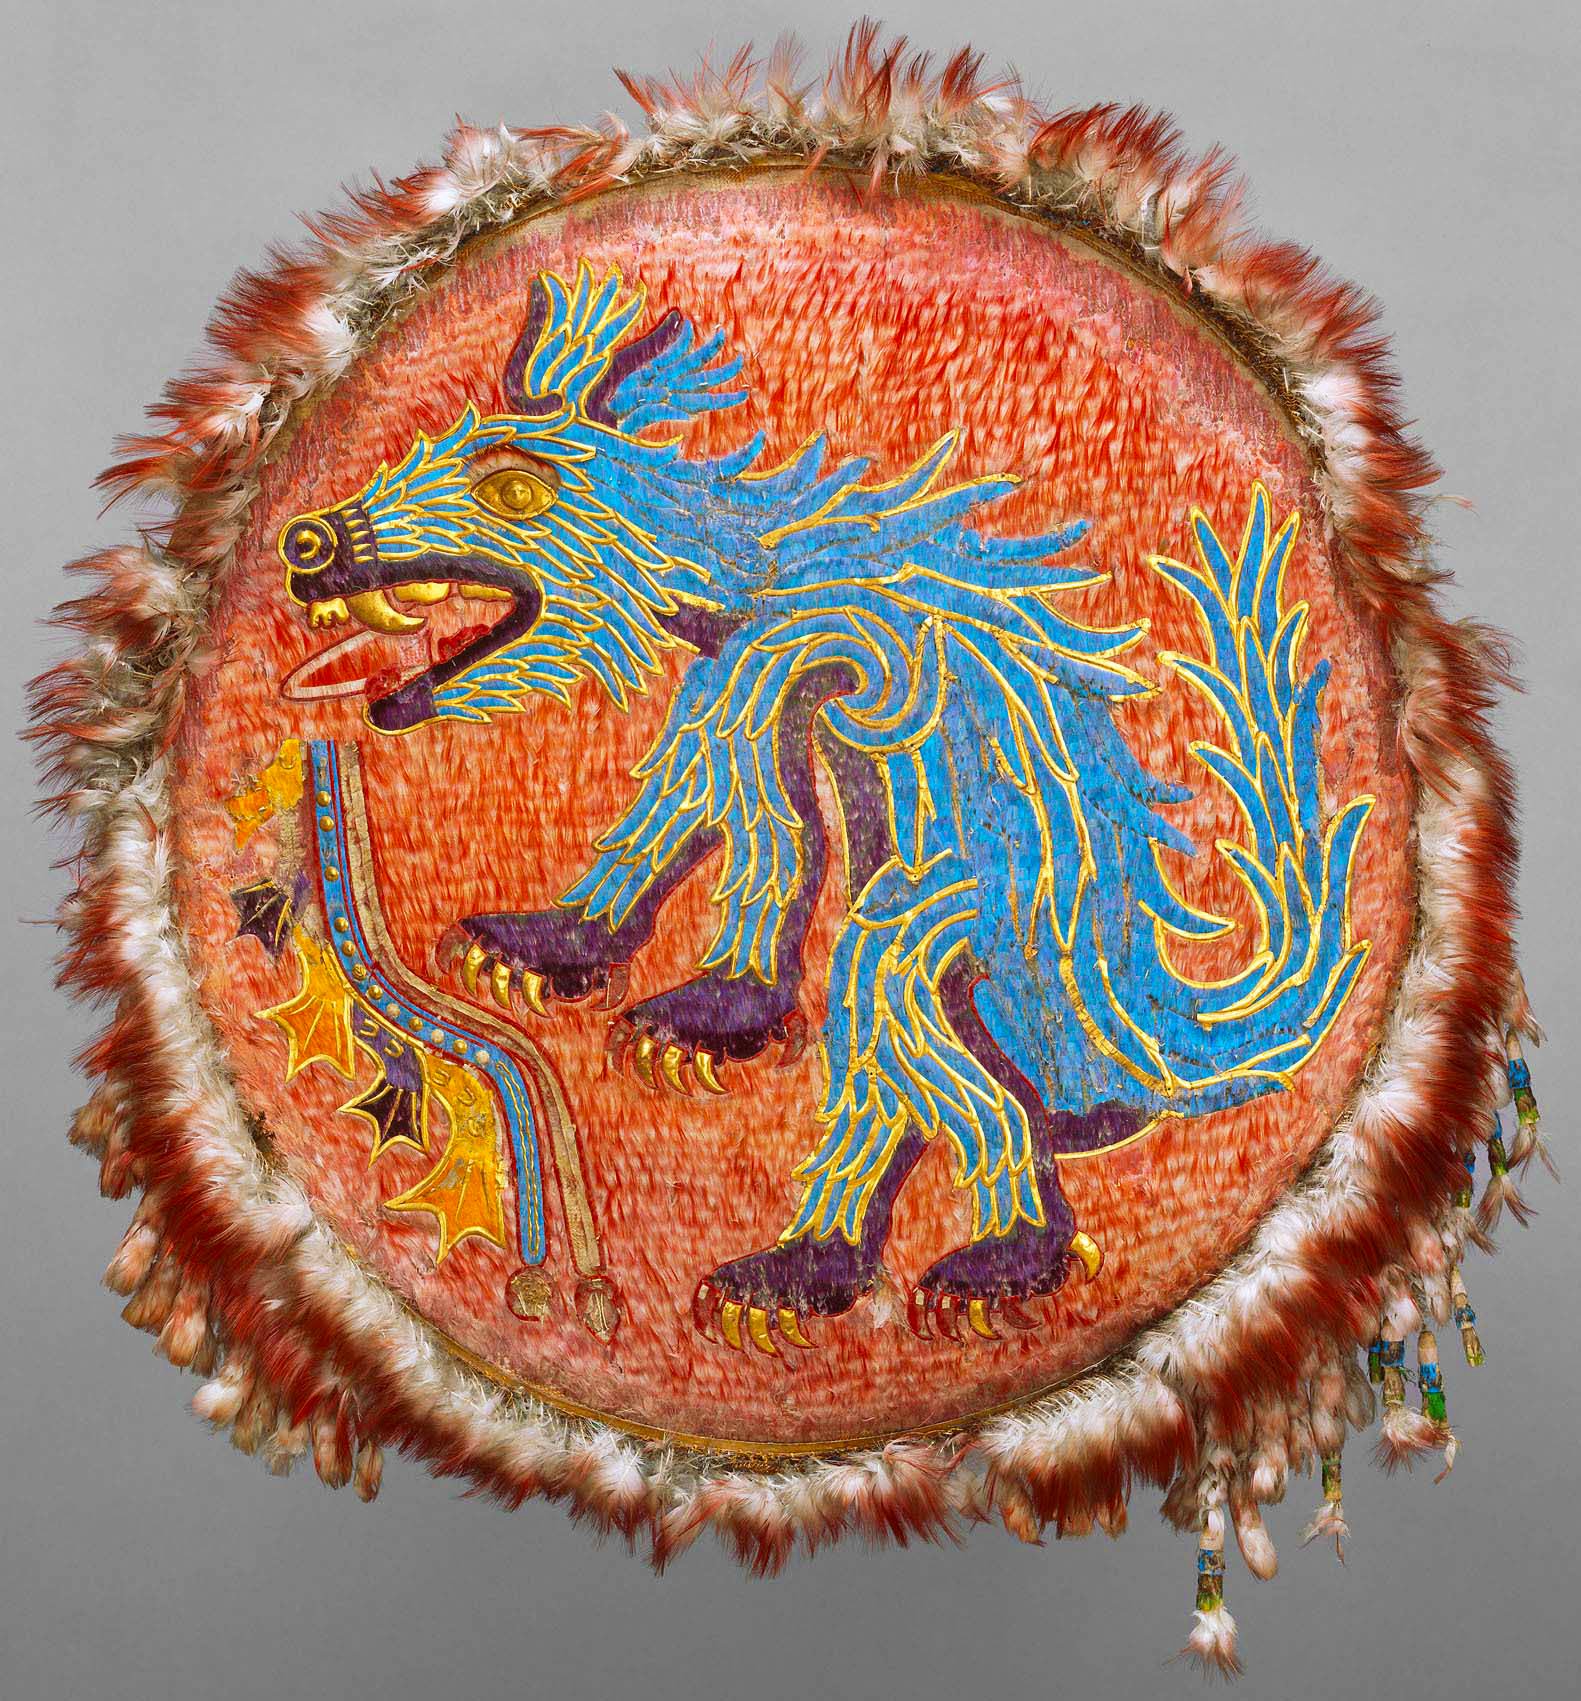 A vibrant and intricately detailed shield showcasing the image of Ahuizotl, an Aztec mythological creature. The creature, predominantly painted in bright blue, exhibits fierce features such as large, sharp claws, a snarling face with prominent fangs, and a distinct curling tail ending with a hand. The background of the shield displays a vivid orange-red texture, imitating fur or feathers, enhancing the contrast with the blue figure. The shield's perimeter is bordered with a layer of fluffy, light-colored feathers, which adds a tactile dimension to the artifact. Dangling from the bottom edge of the shield are several small adornments or talismans, adding depth and movement. 